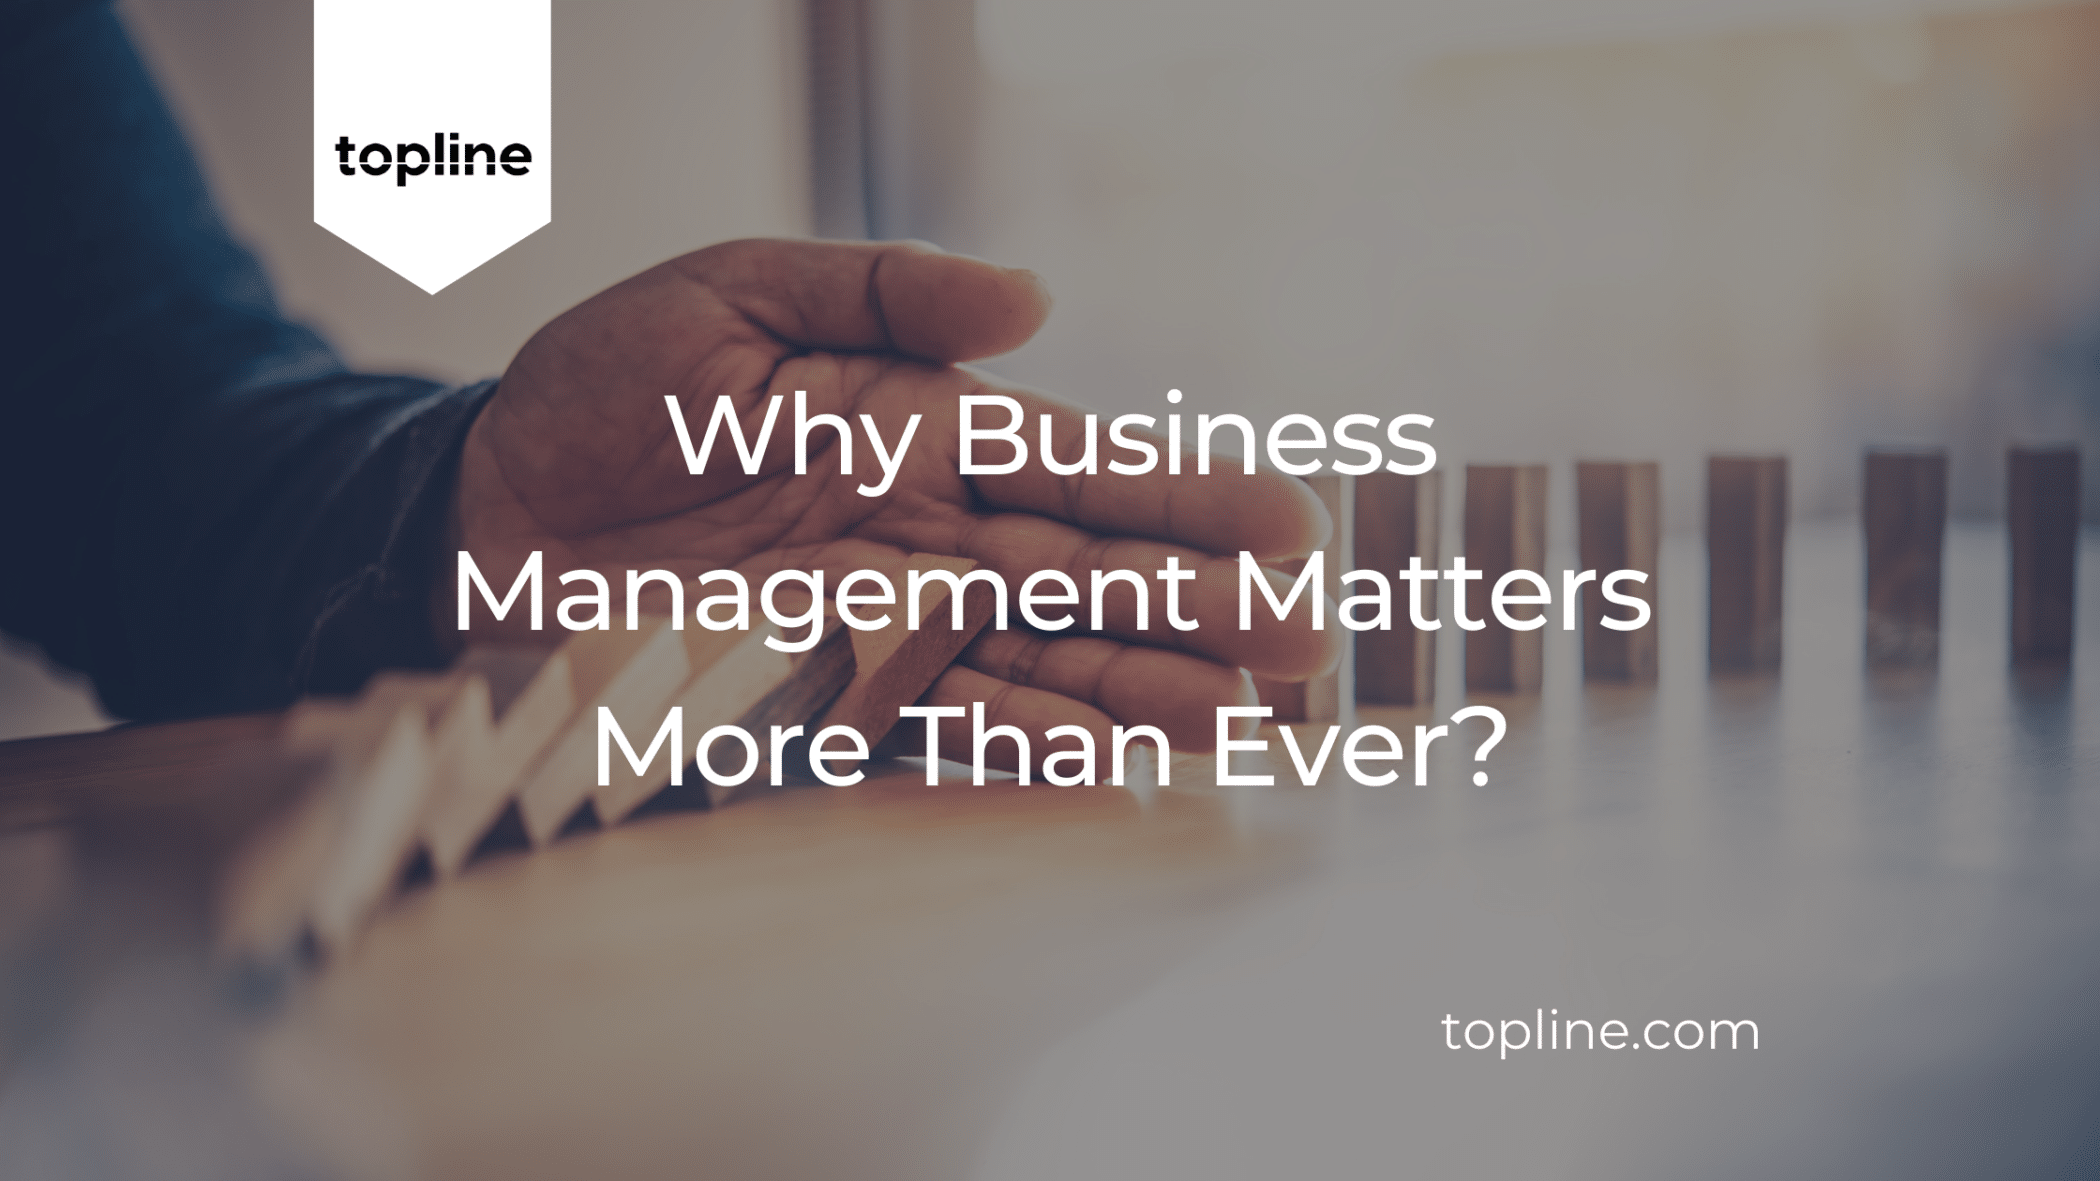 Why Business Management Matters More Than Ever?